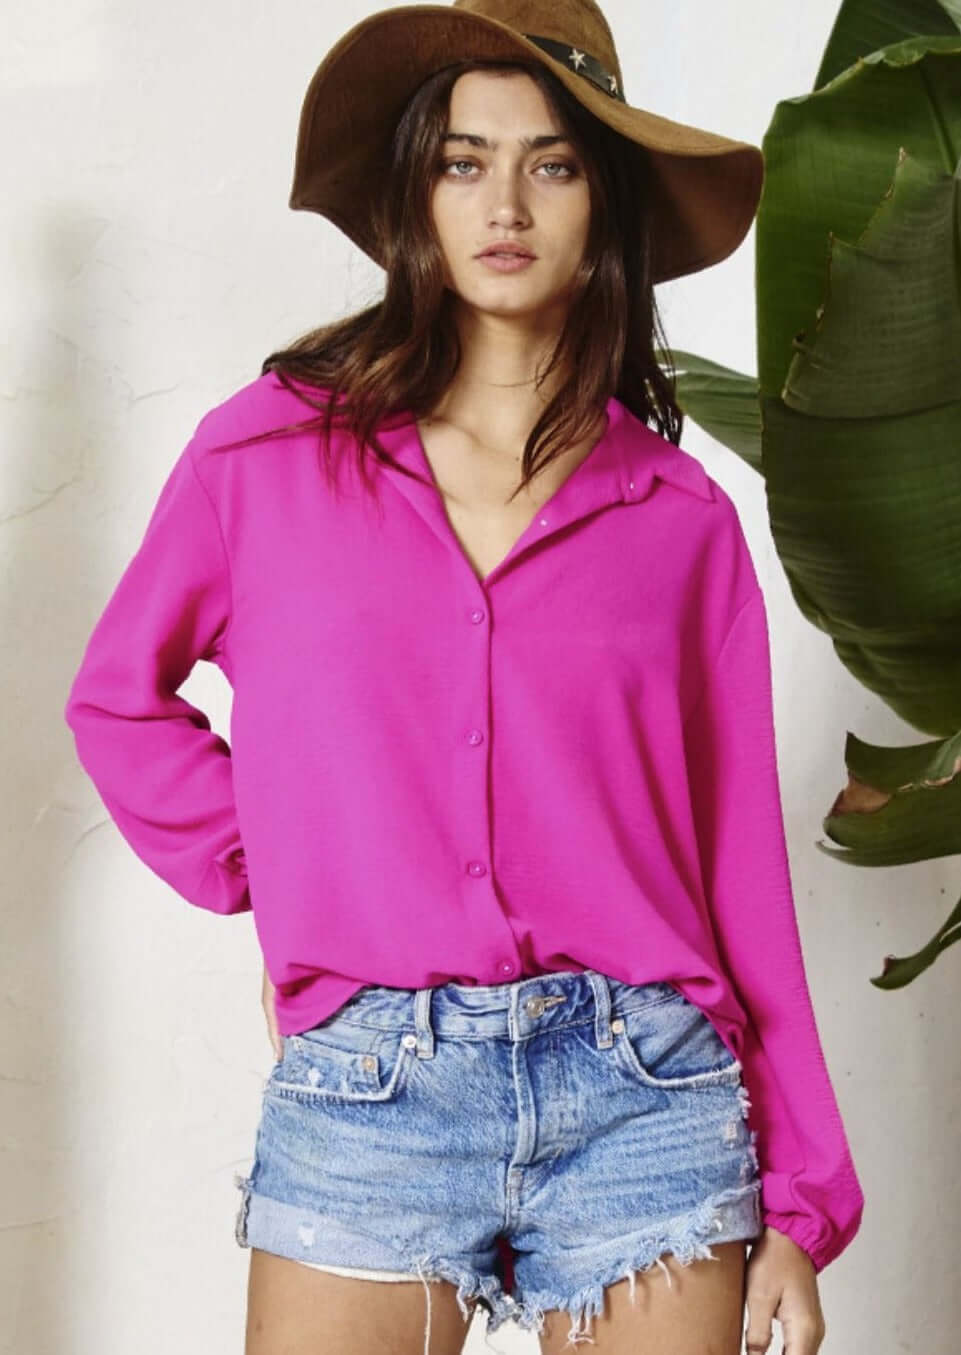 Bucket List Style# T1943 | Ladies Solid Dressy Button Down Top with Bubble Sleeves in Fuchsia Color | Made in USA | Classy Cozy Cool American Made Women's Clothing Boutique